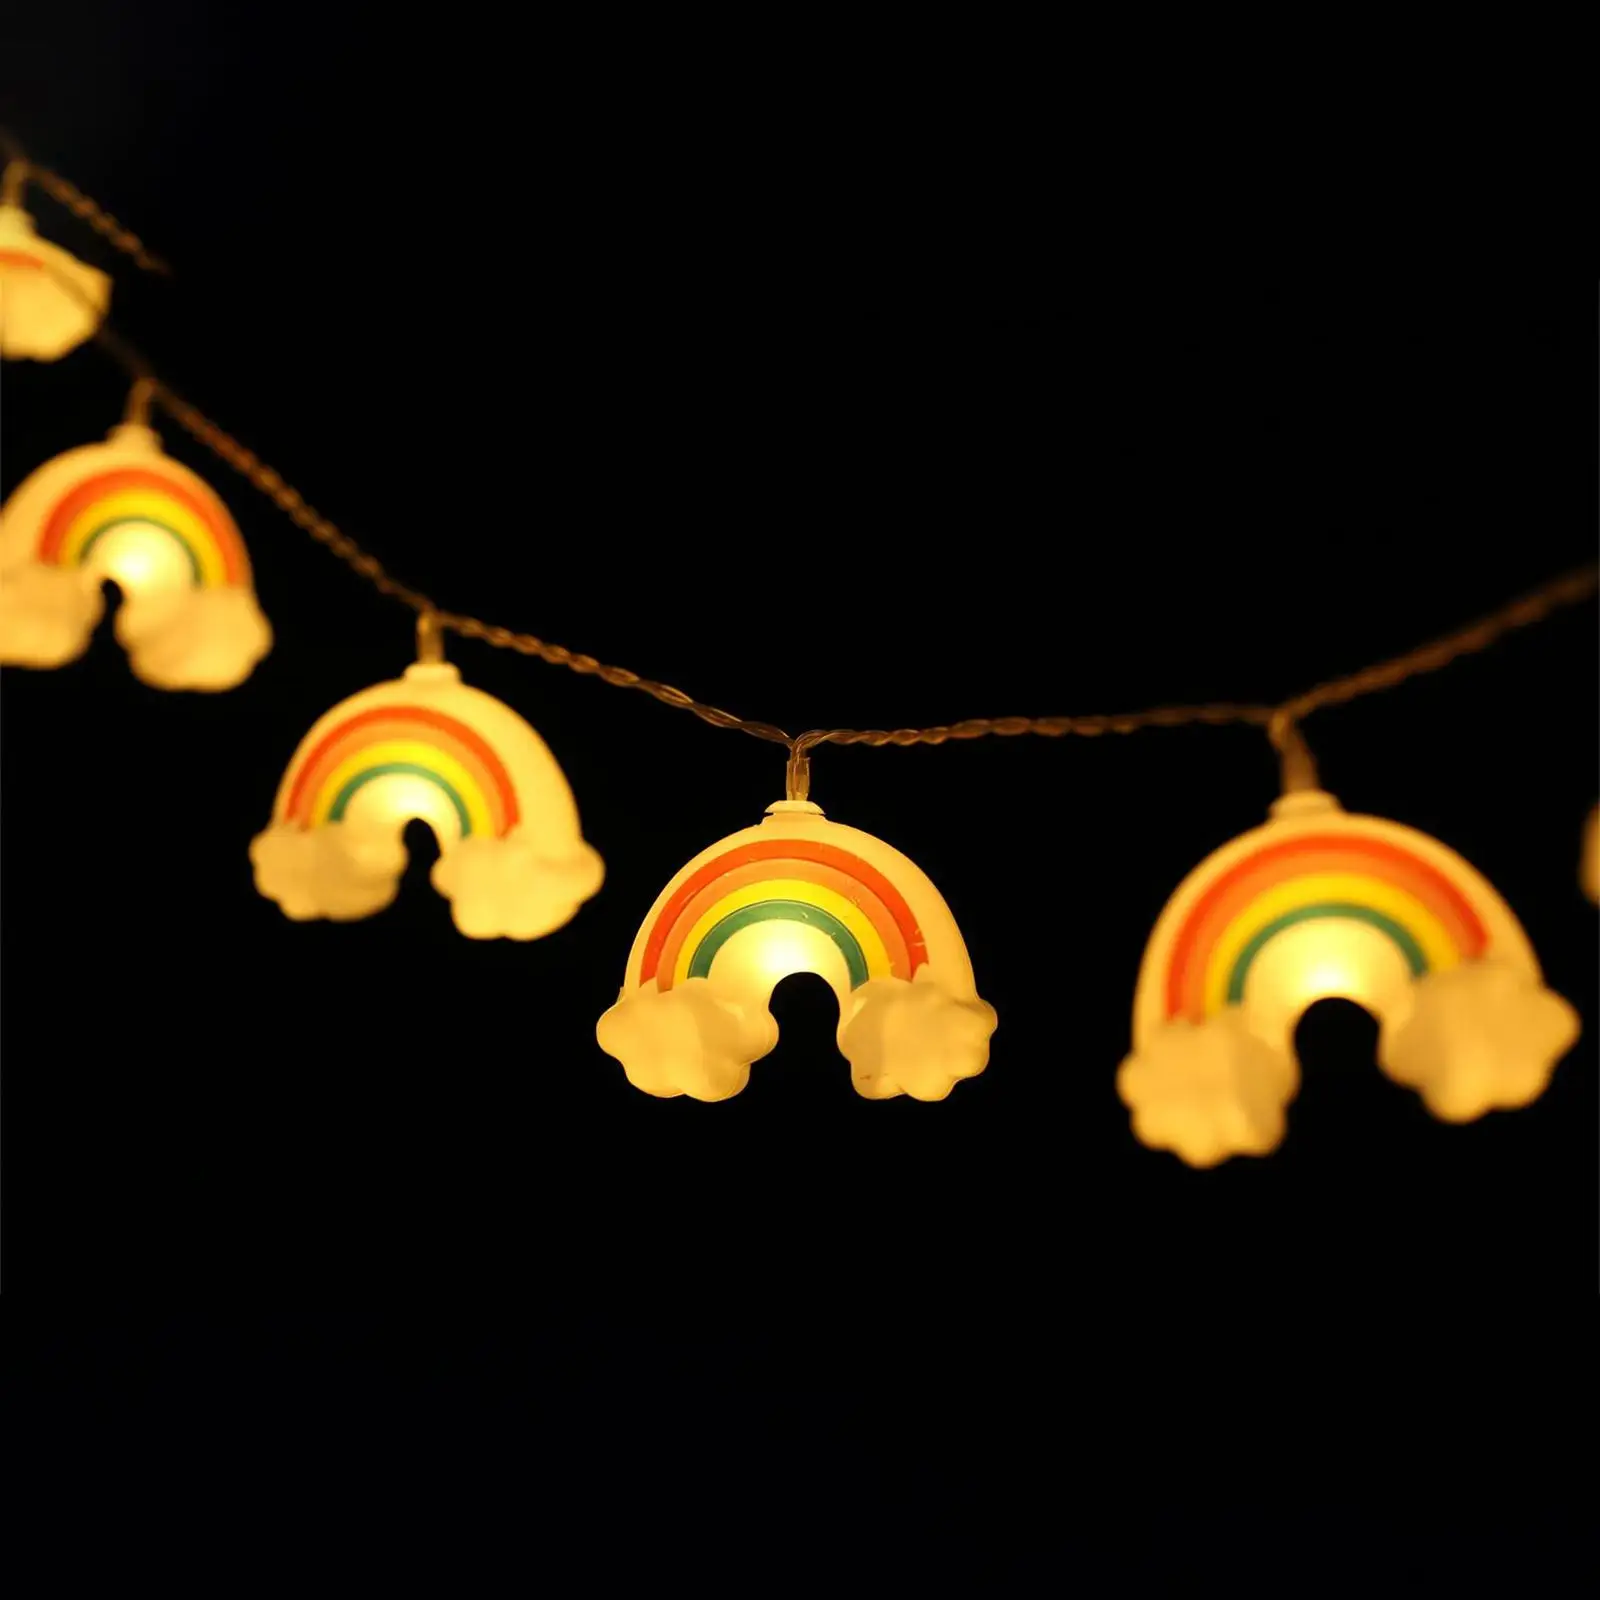 Rainbow String Lights Fairy Lights Decorative Contain 20 Lights Lamp for Outdoor Pathway Summer Beach Camping Wedding Decor